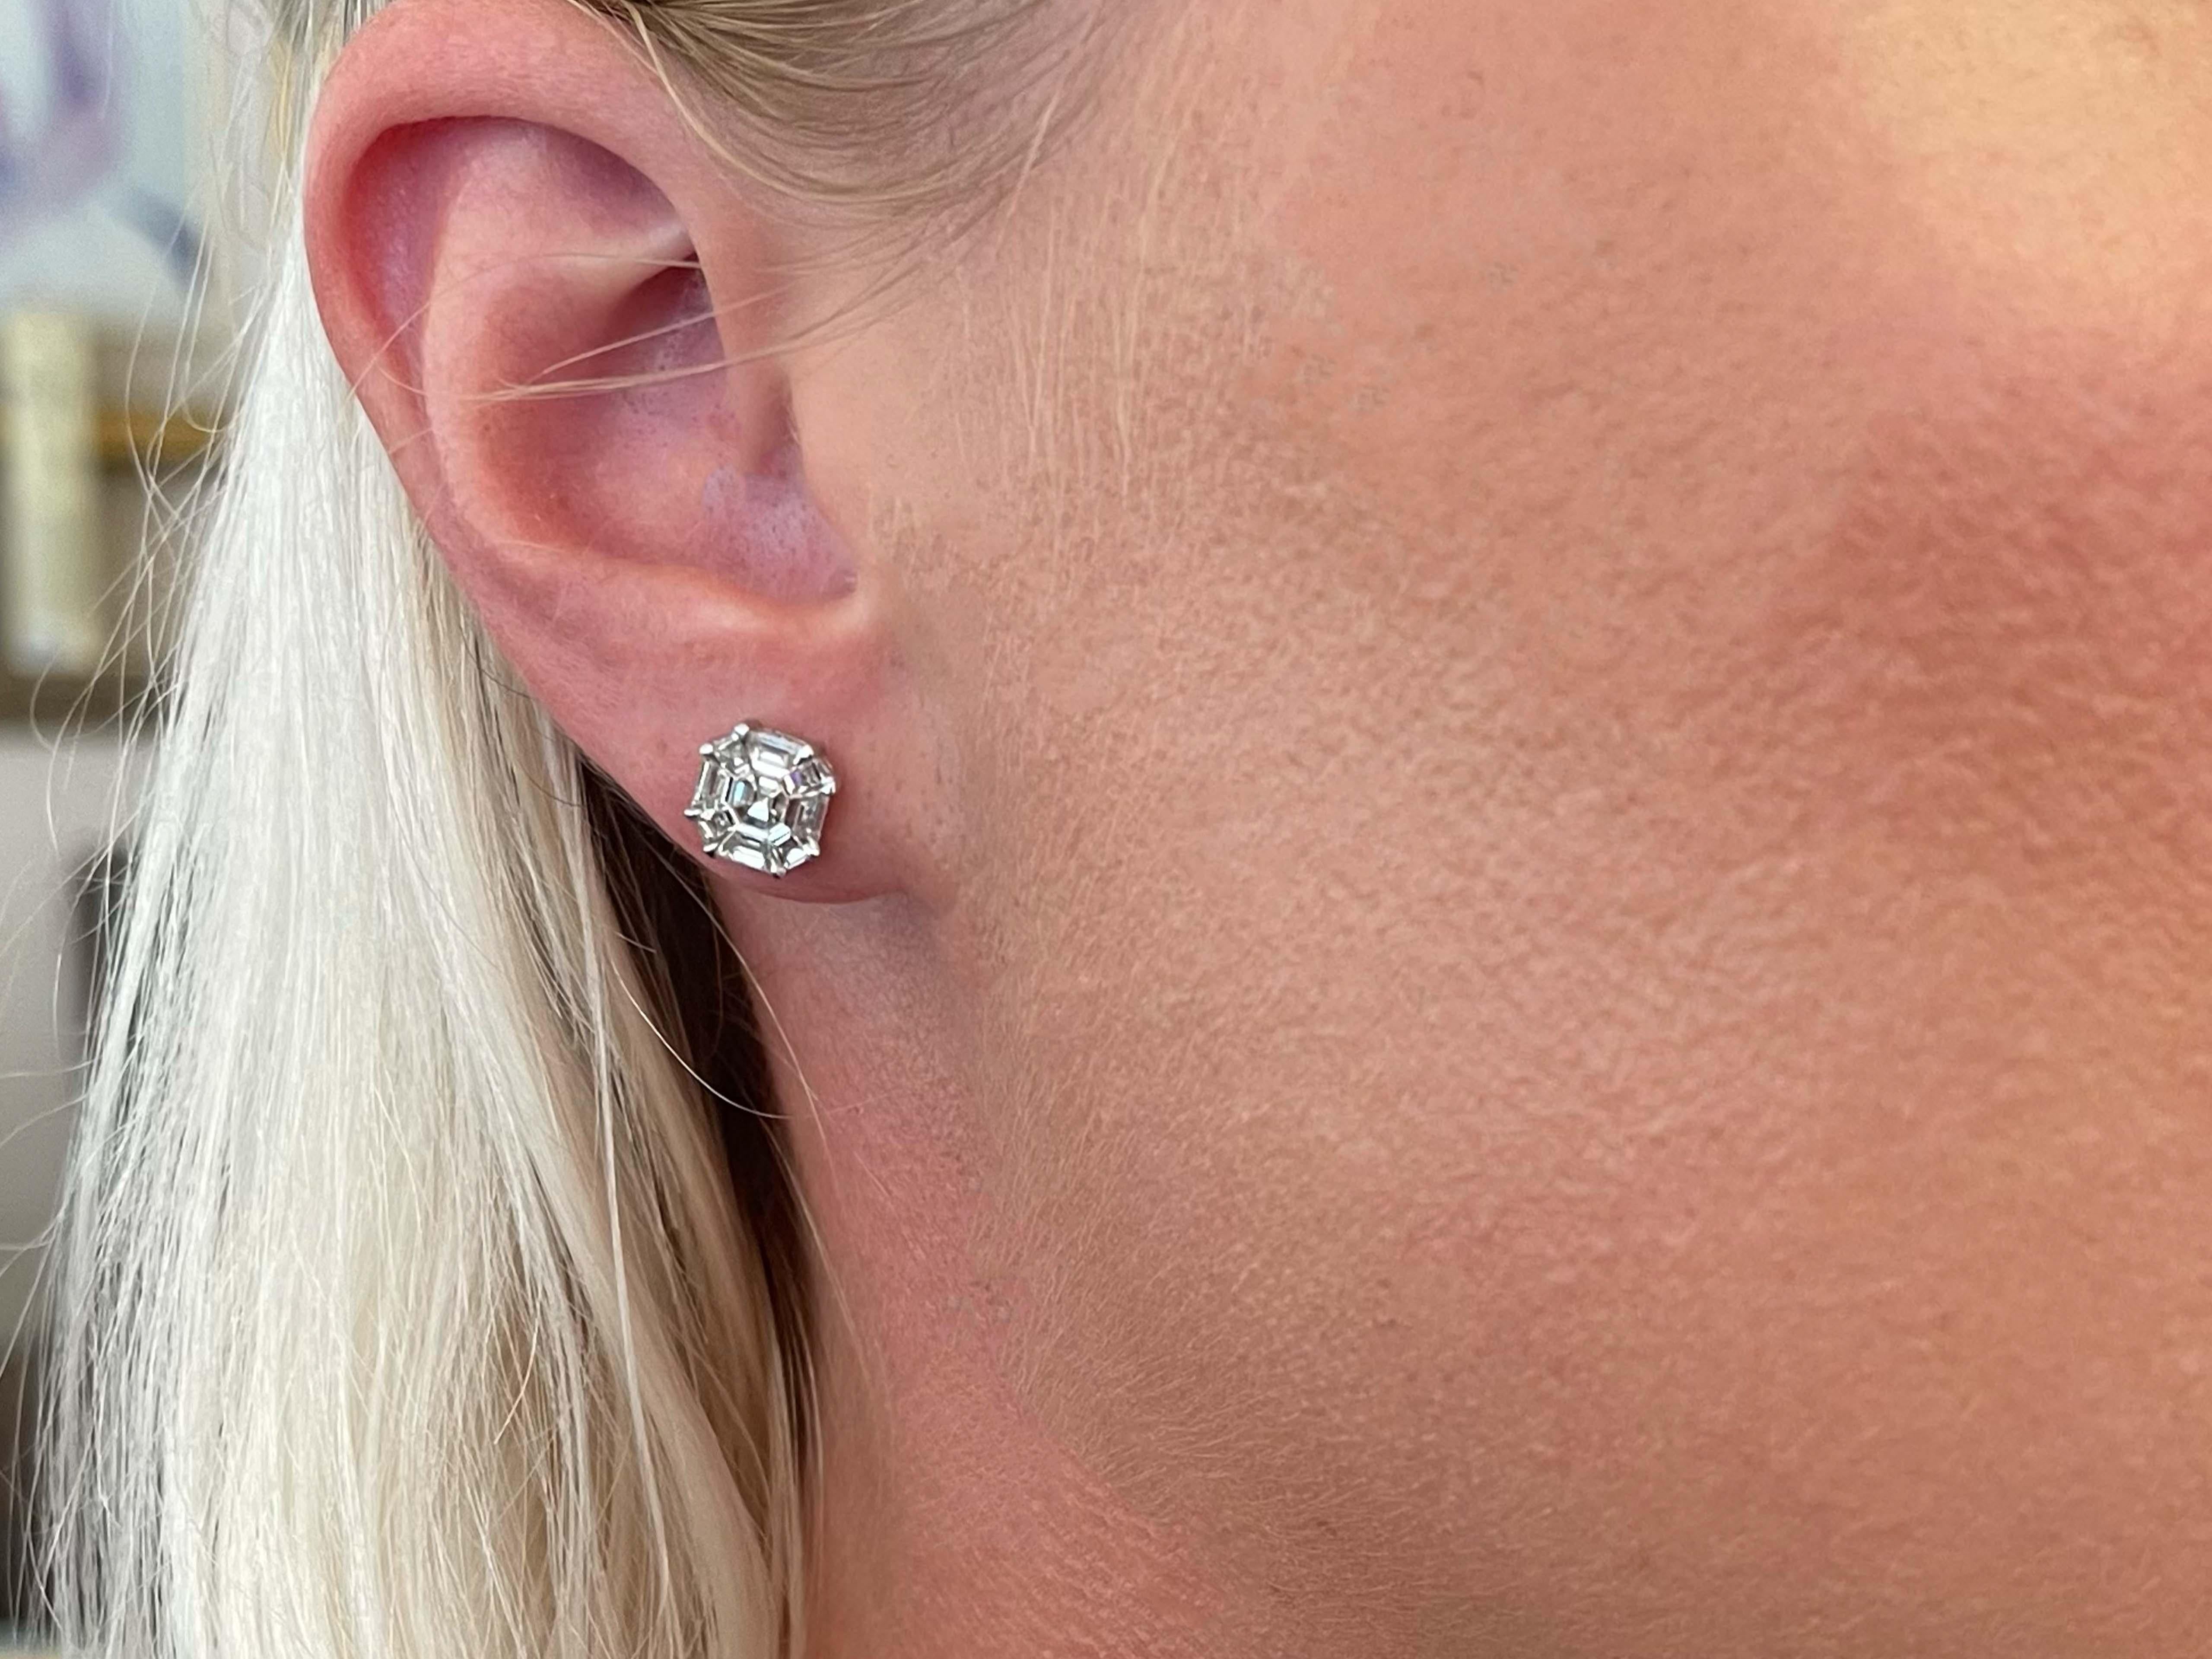 These gorgeous earrings each feature an asscher pie cut diamond prong set, with a total carat weight of 1.21 carats. The diamonds are G-H, VS and have beautiful sparkle. The earrings measure 8.3 mm in diameter. These earrings are beautifully crafted